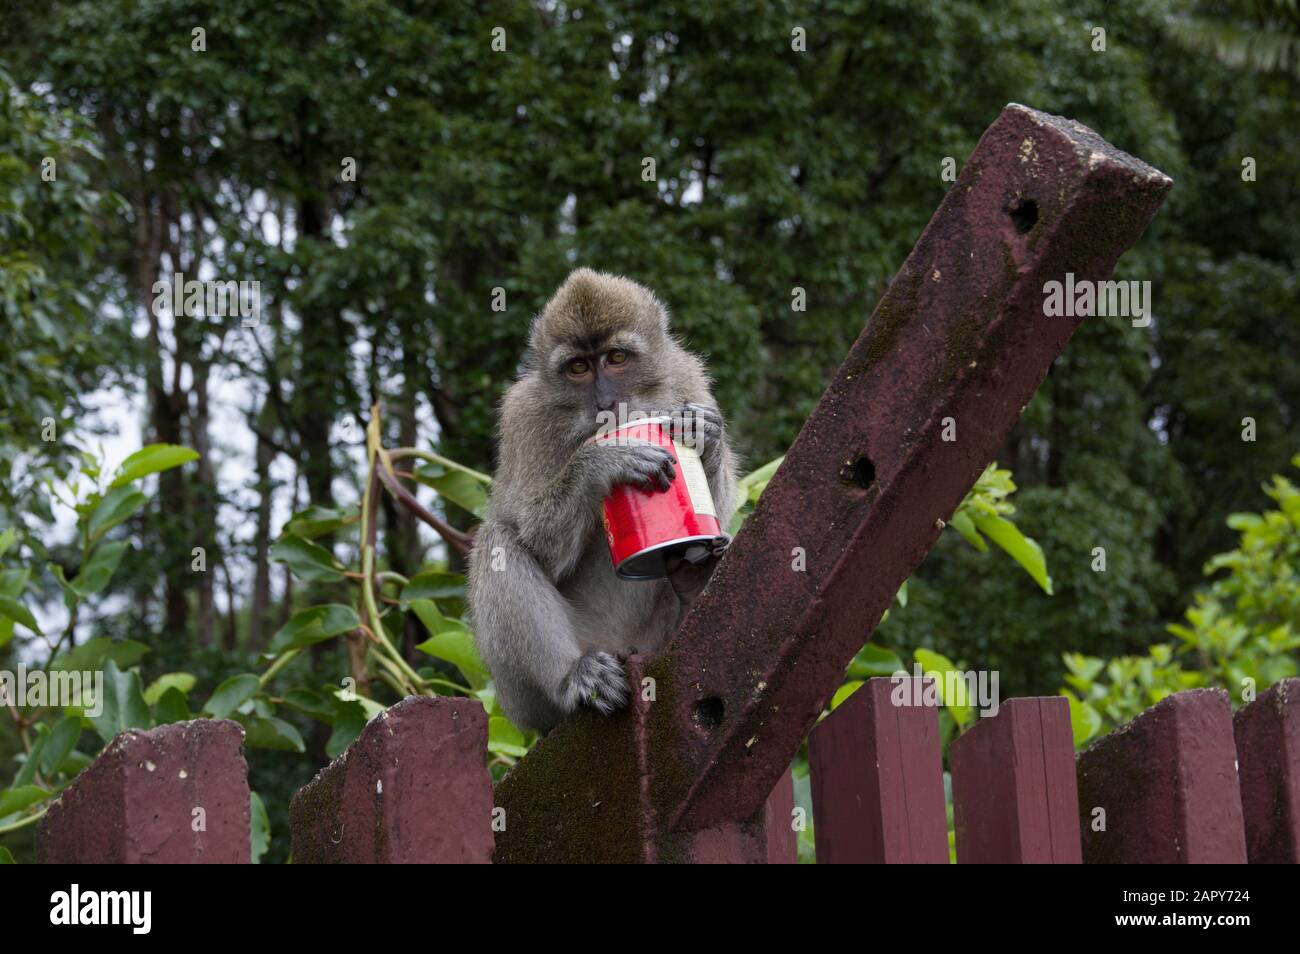 Long-tailed macaque monkey - macaca fascicularis - holds what looks like a Pringles can against a Mauritian forest backdrop in Grand Basin Mauritius Stock Photo